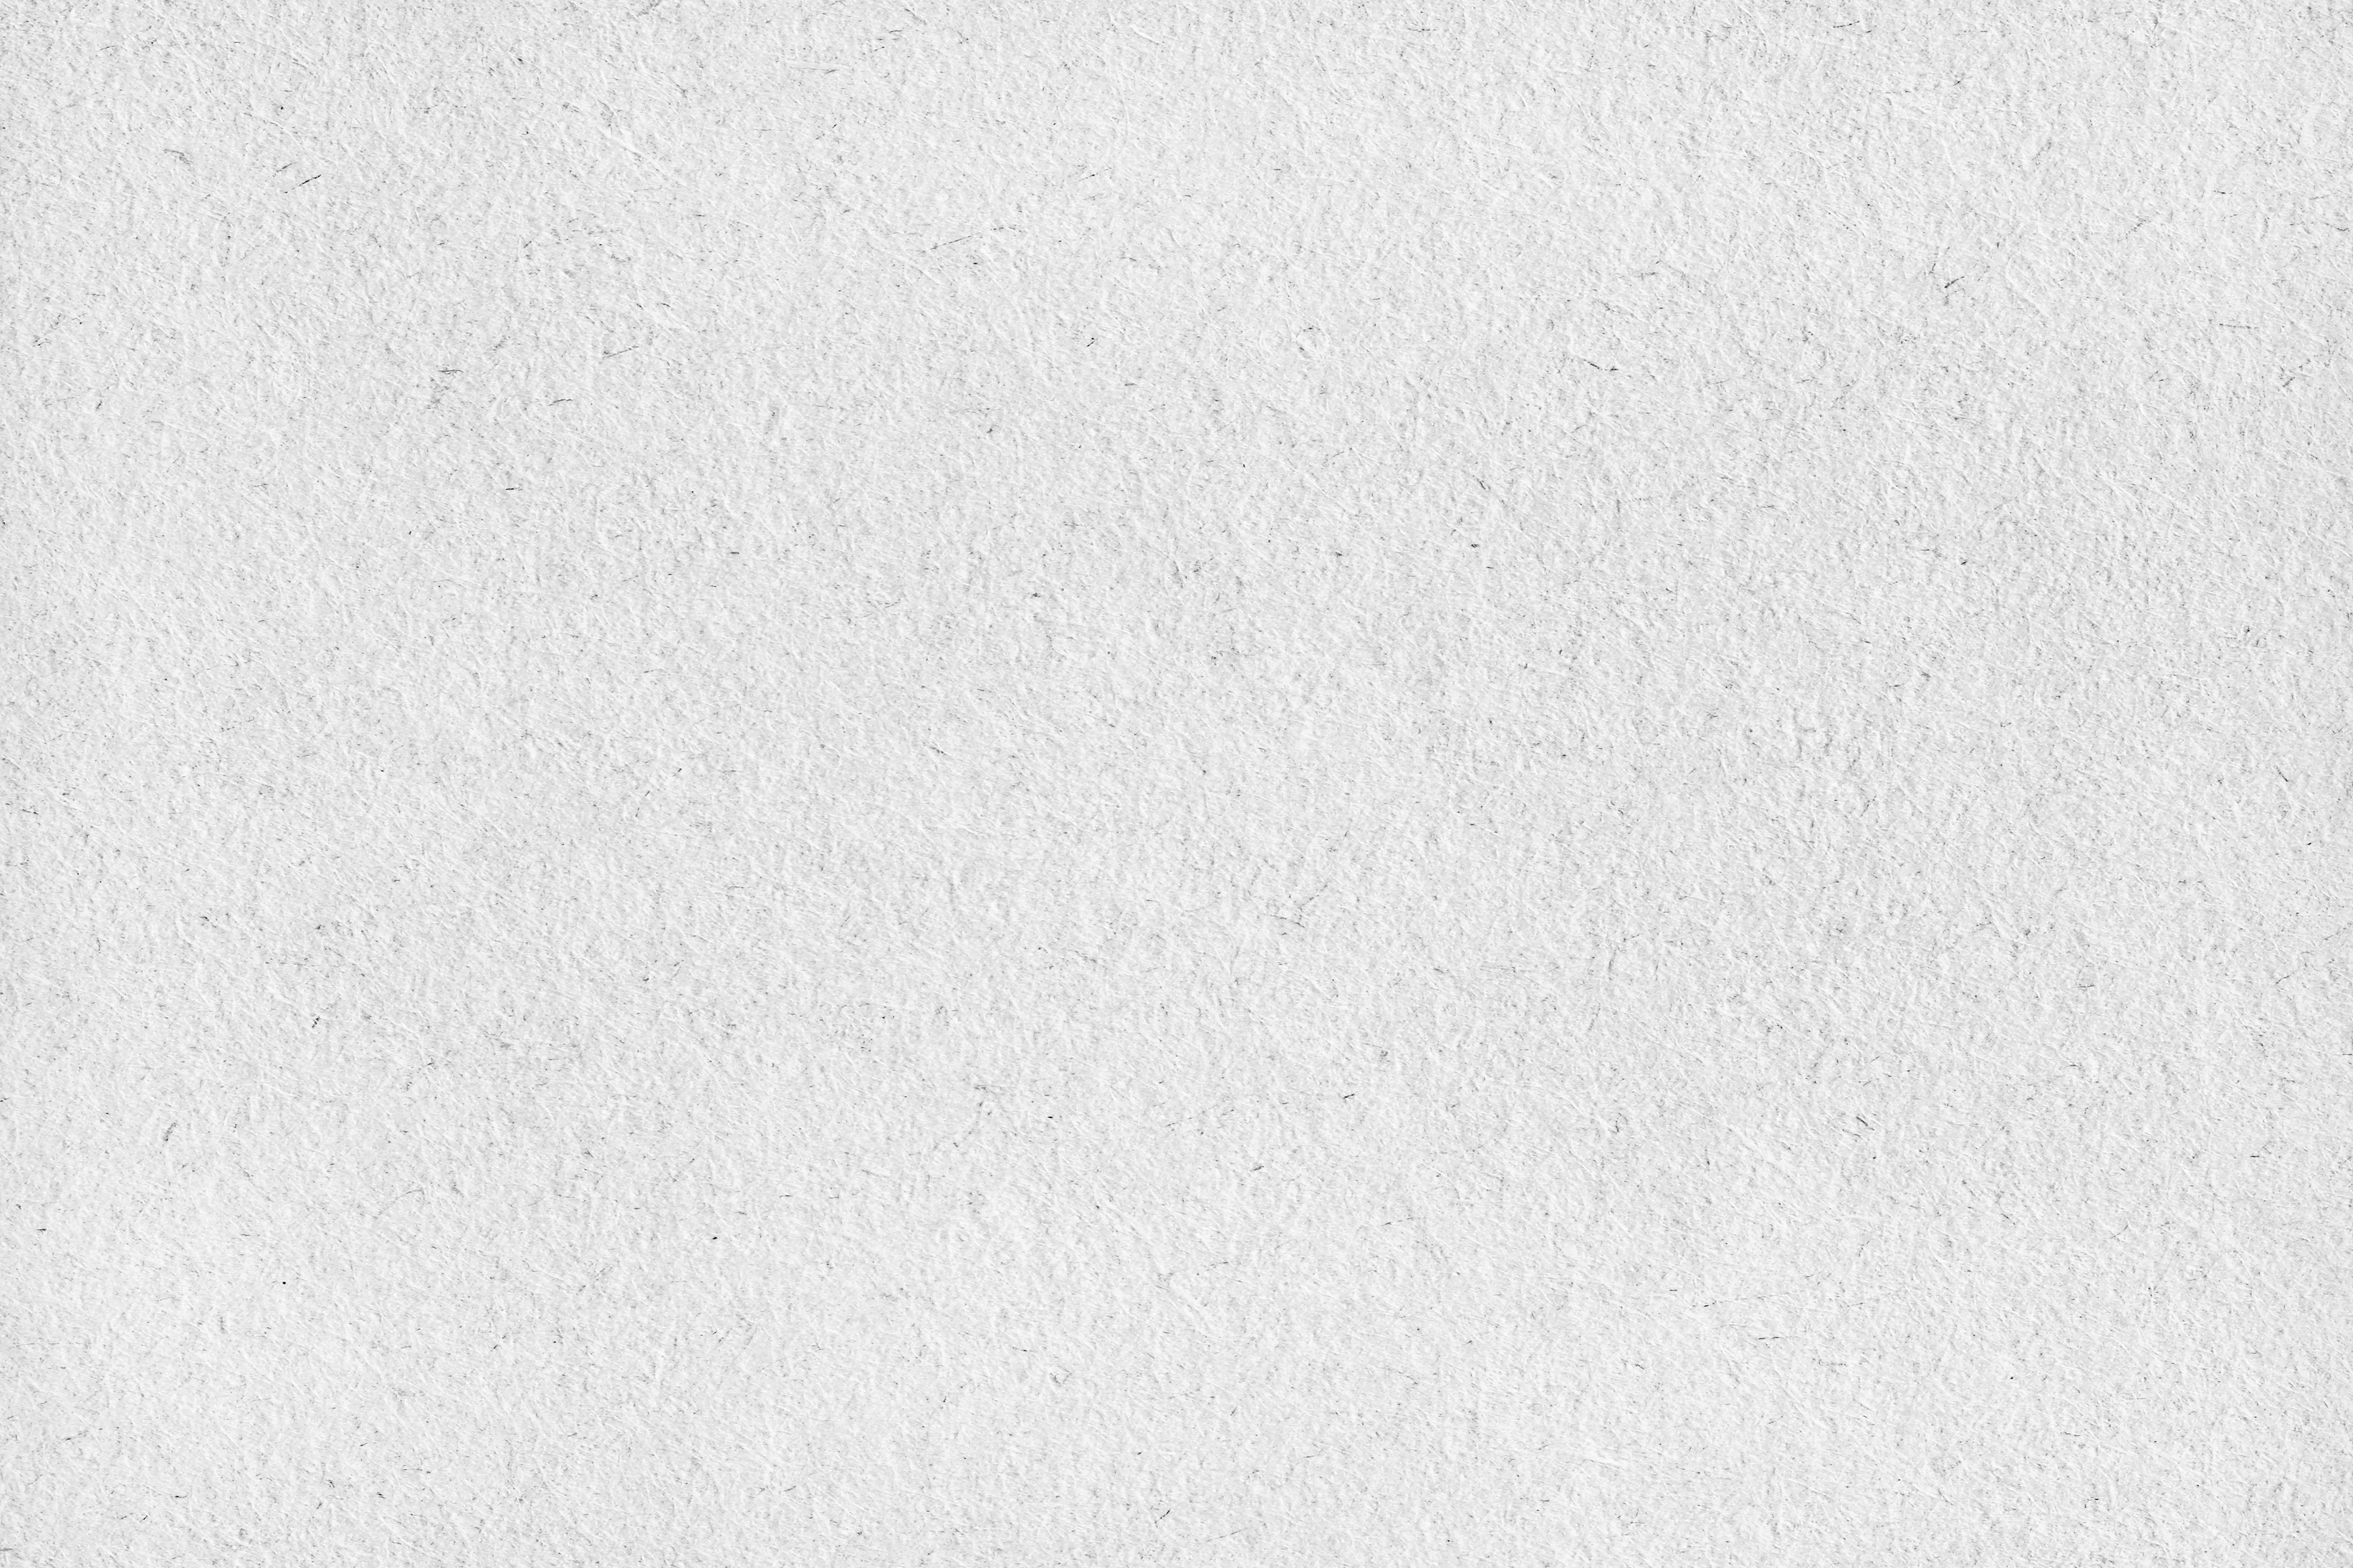 texture paper white clean. background